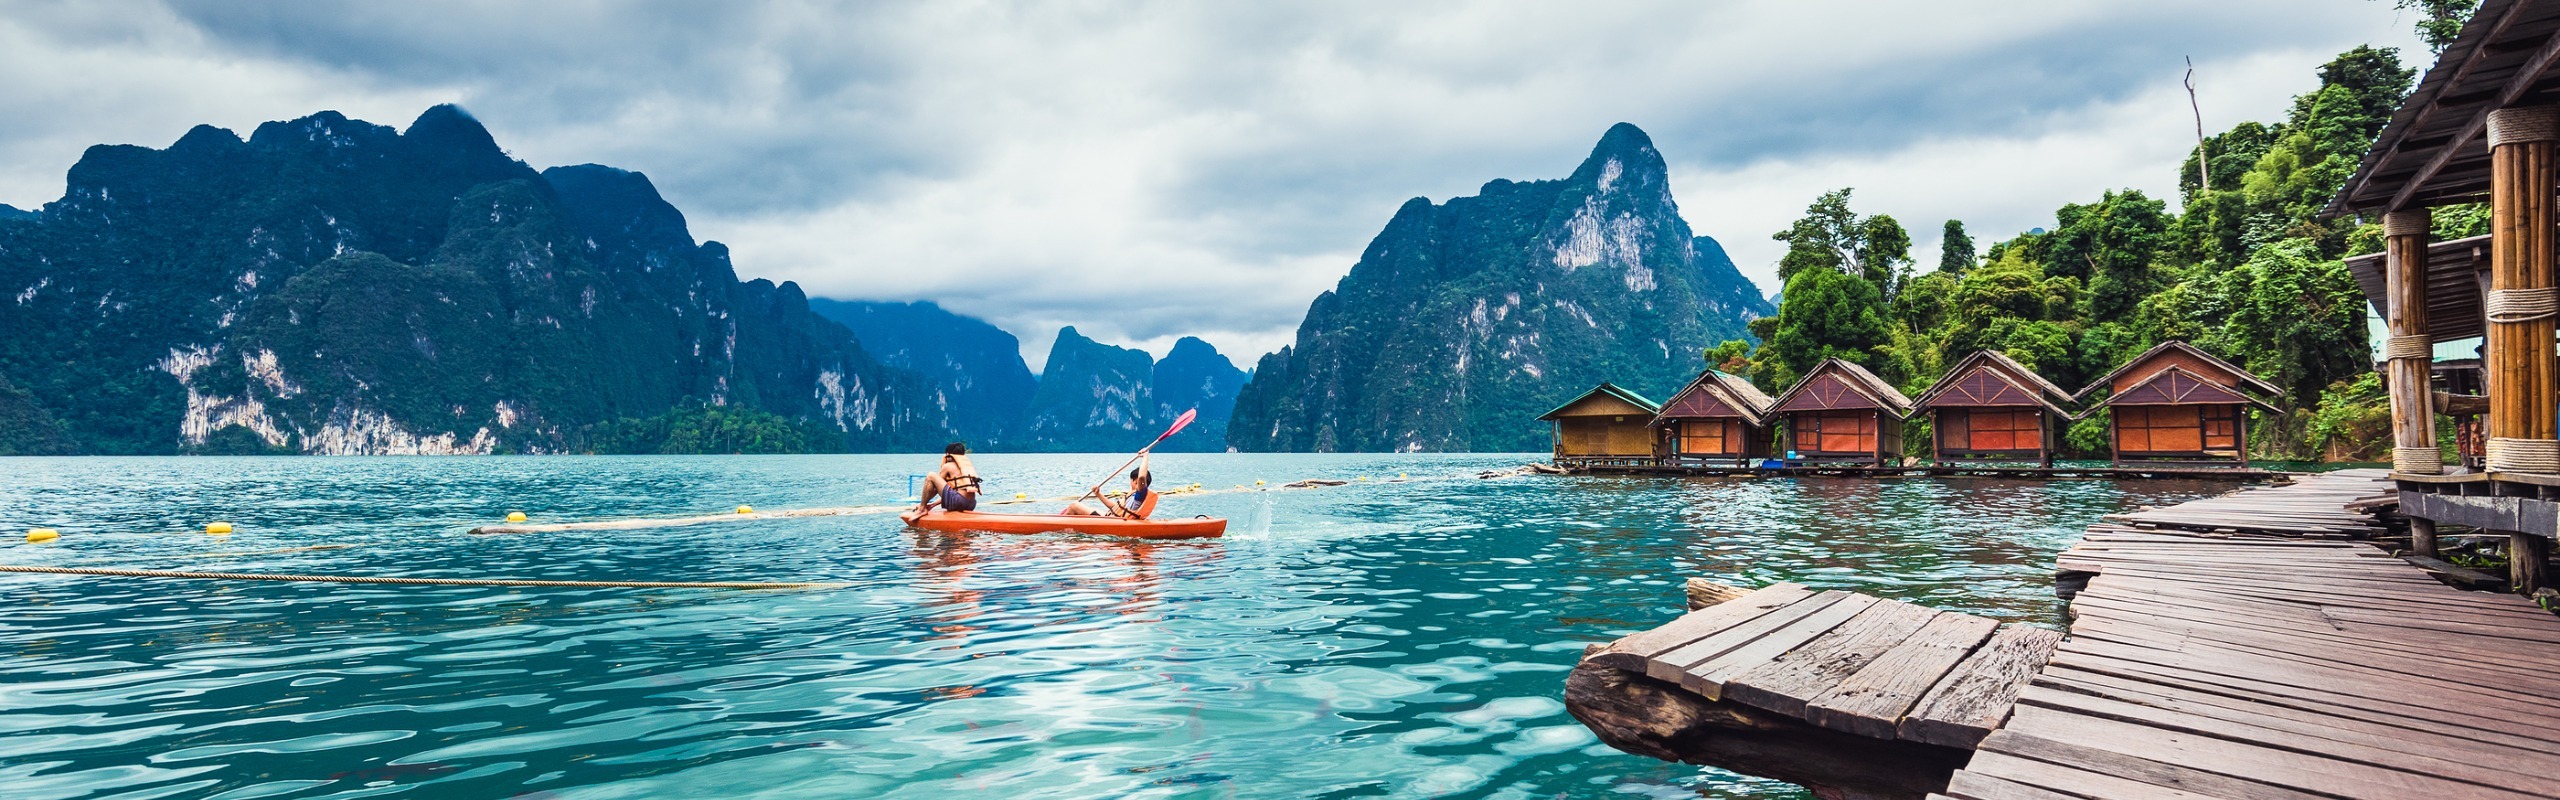 Thailand Honeymoons/Anniversary: 8 Best Places for Romantic Stays, Itineraries